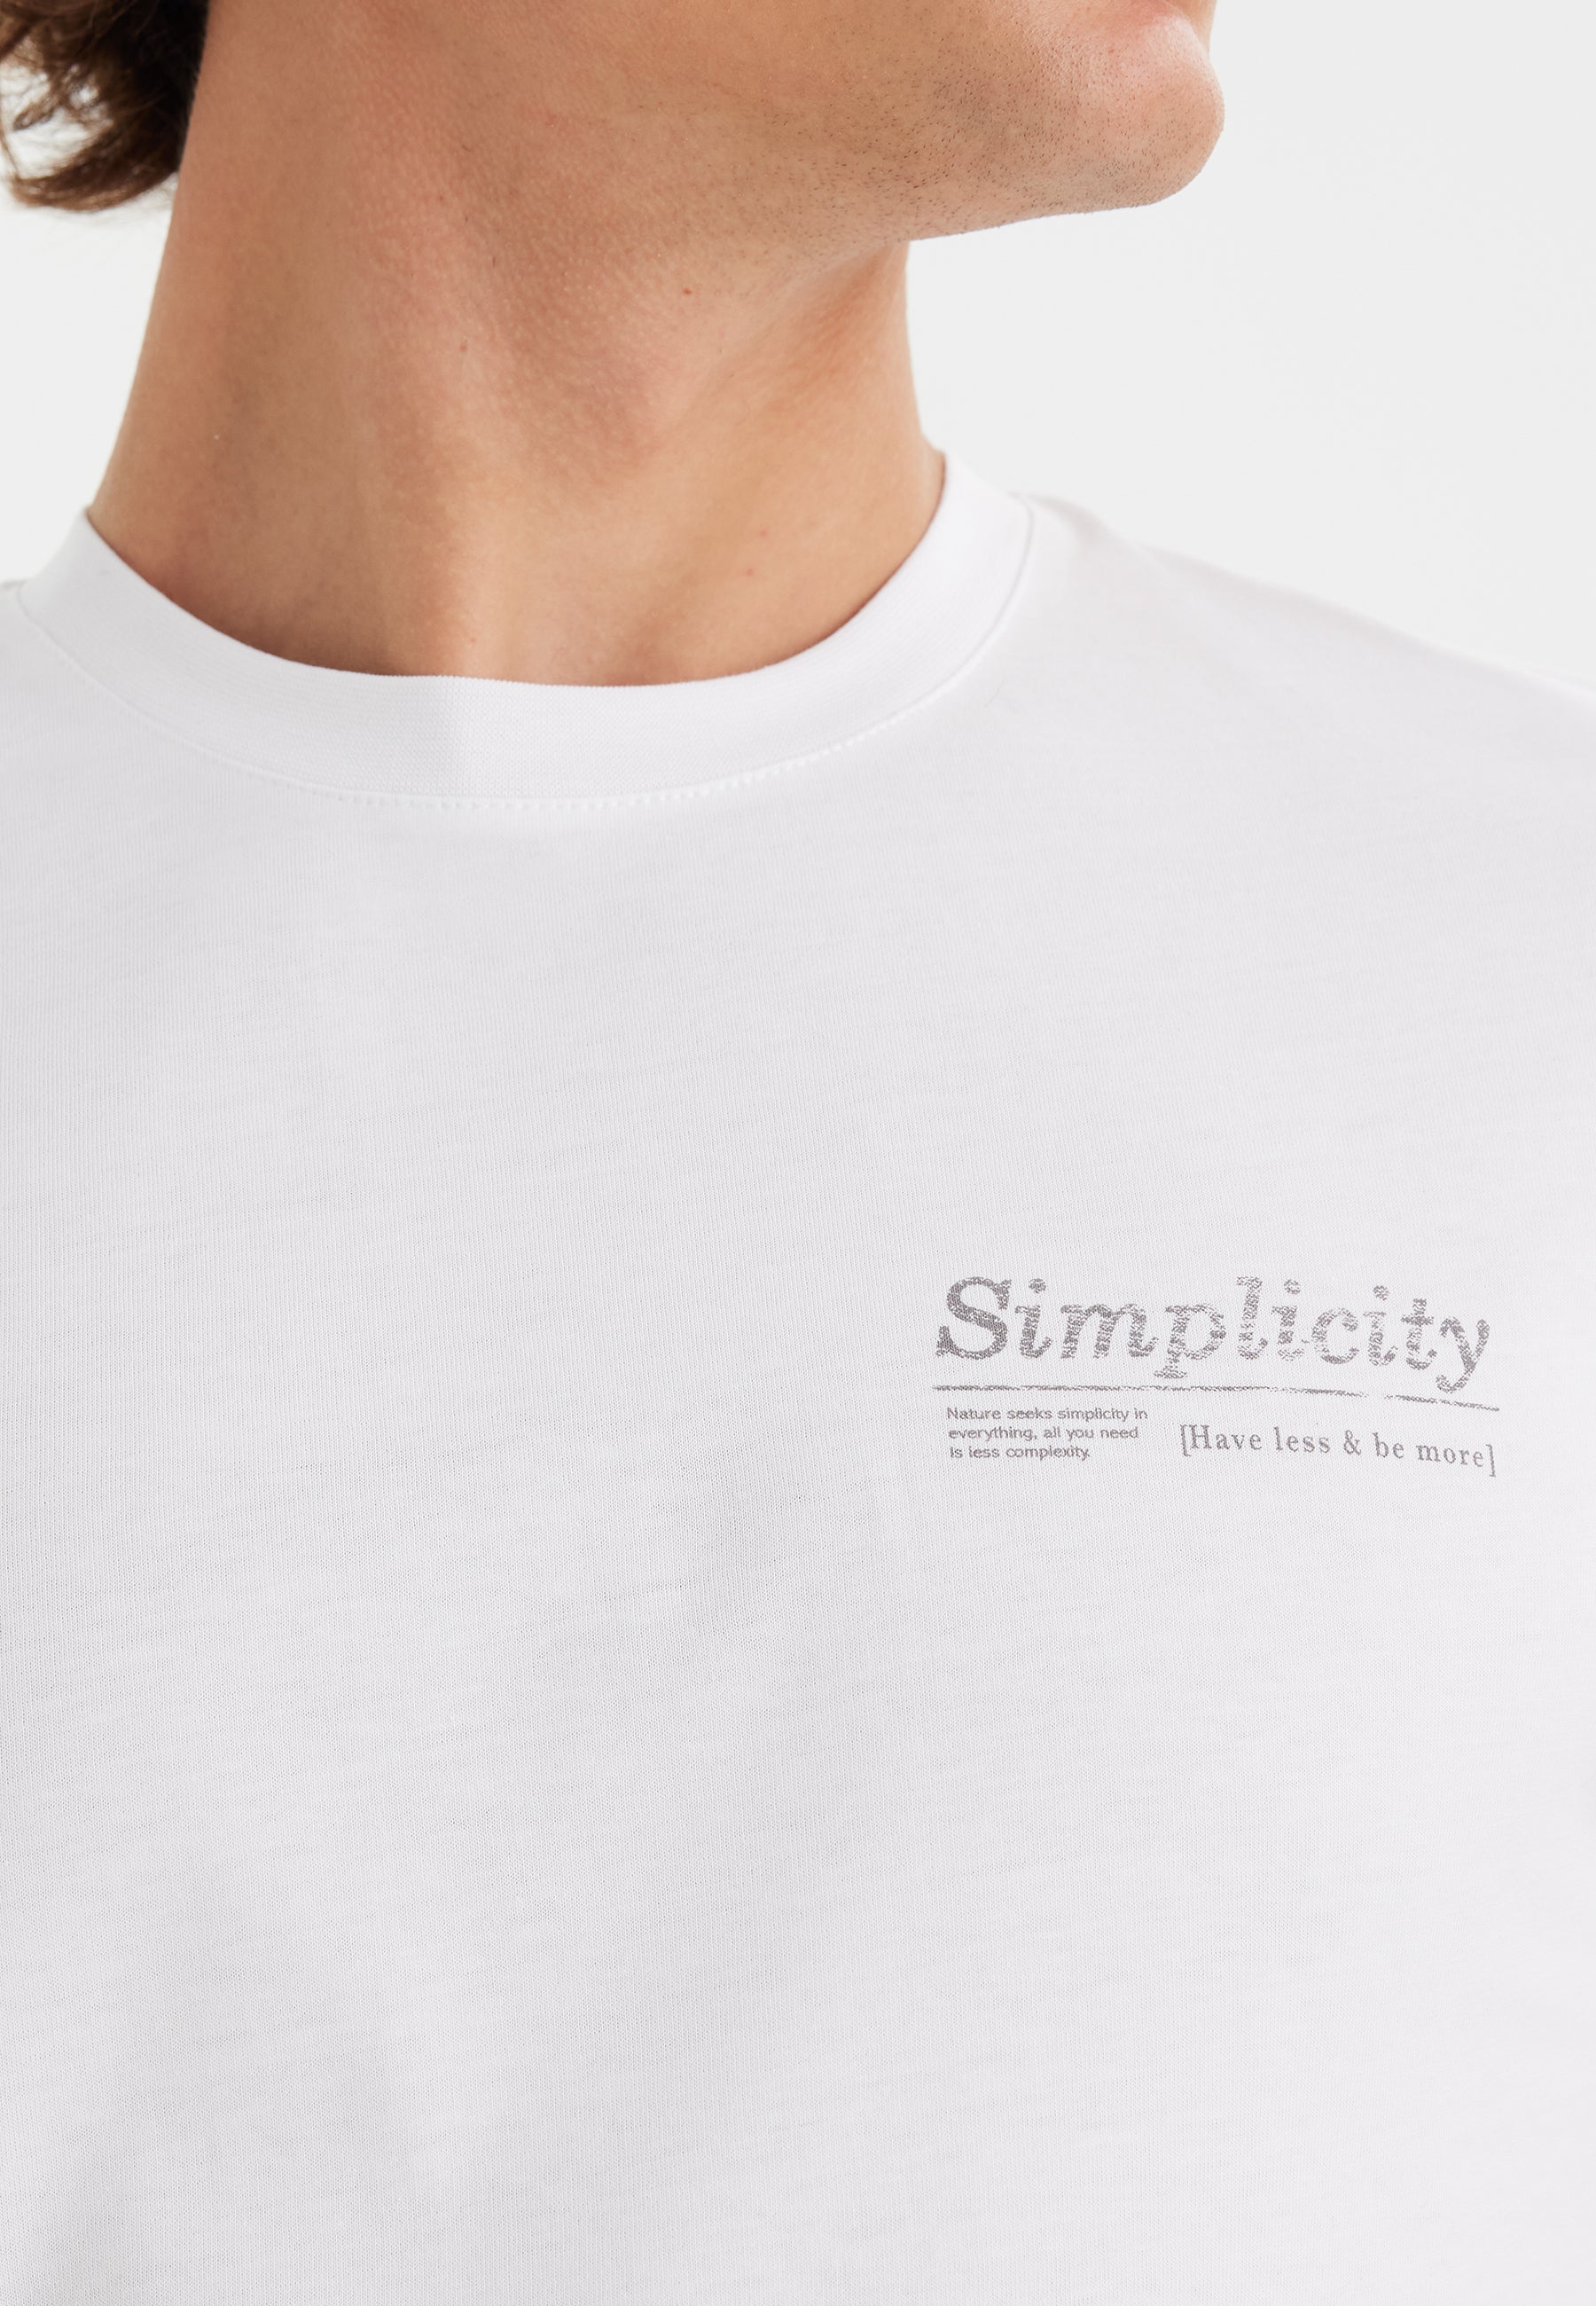 WMEMBROIDERY SIMPLICITY TEE in White